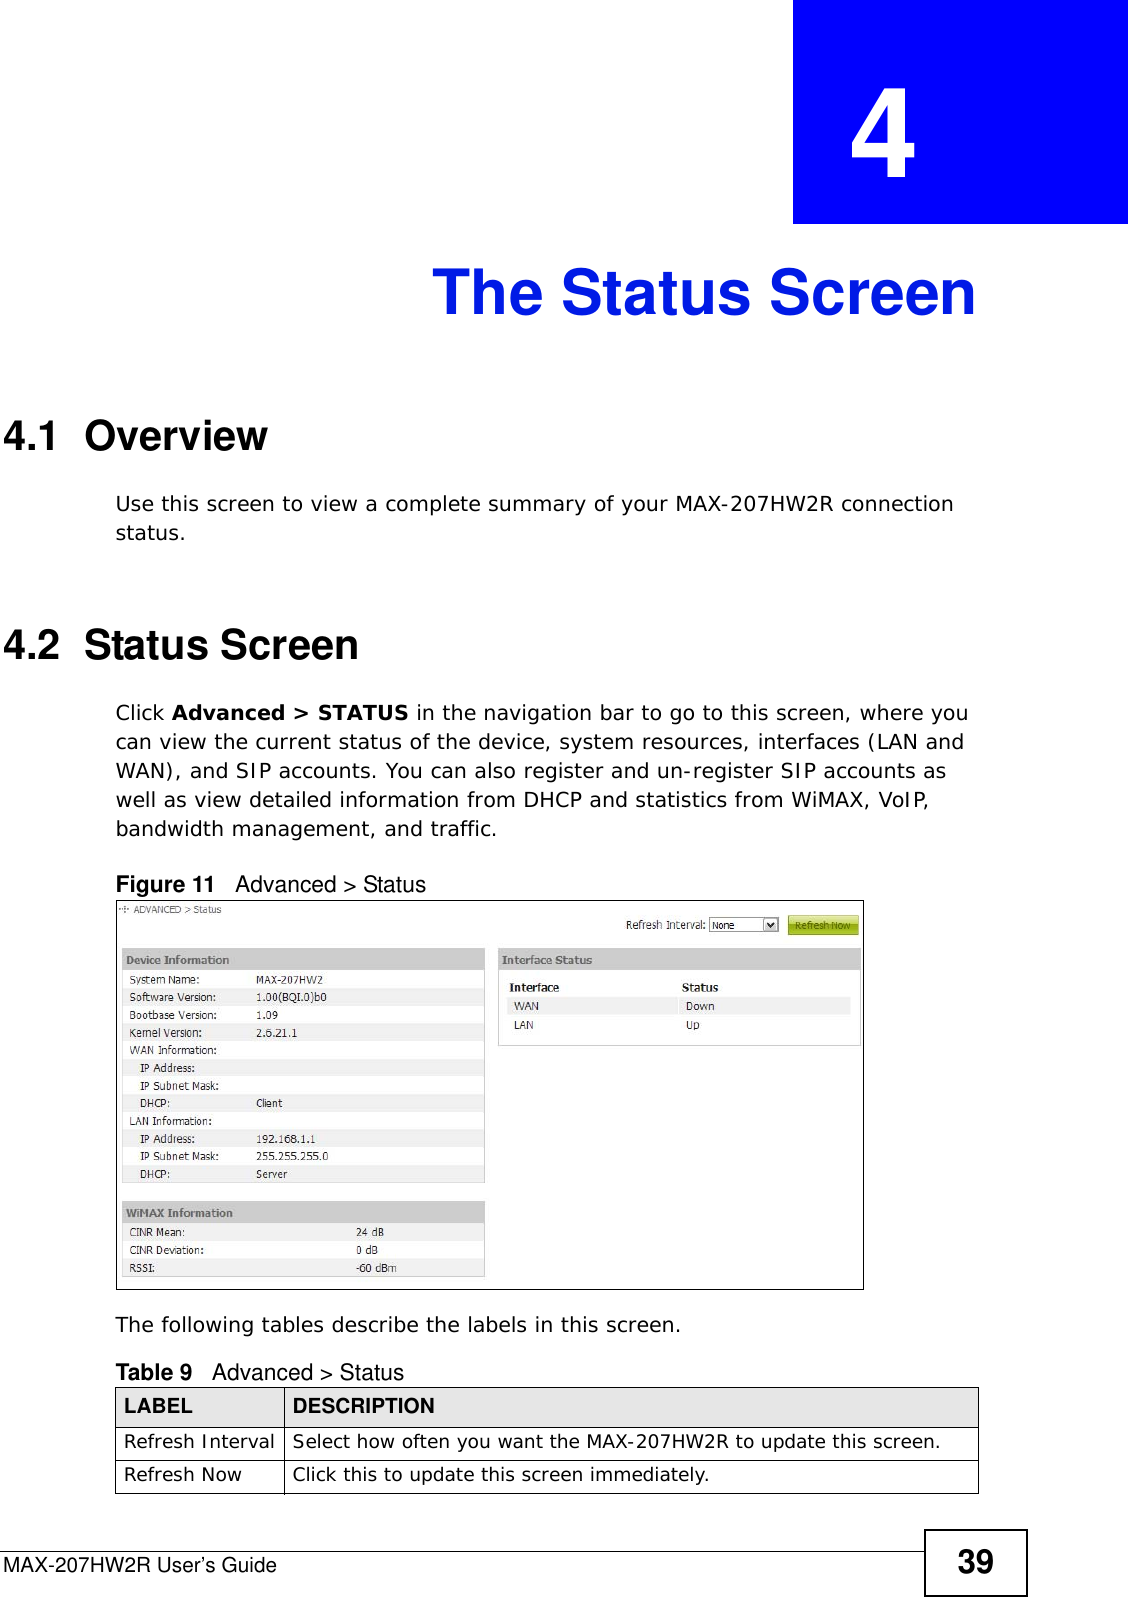 MAX-207HW2R User’s Guide 39CHAPTER  4 The Status Screen4.1  OverviewUse this screen to view a complete summary of your MAX-207HW2R connection status.4.2  Status ScreenClick Advanced &gt; STATUS in the navigation bar to go to this screen, where you can view the current status of the device, system resources, interfaces (LAN and WAN), and SIP accounts. You can also register and un-register SIP accounts as well as view detailed information from DHCP and statistics from WiMAX, VoIP, bandwidth management, and traffic.Figure 11   Advanced &gt; StatusThe following tables describe the labels in this screen.    Table 9   Advanced &gt; StatusLABEL DESCRIPTIONRefresh Interval Select how often you want the MAX-207HW2R to update this screen.Refresh Now Click this to update this screen immediately.